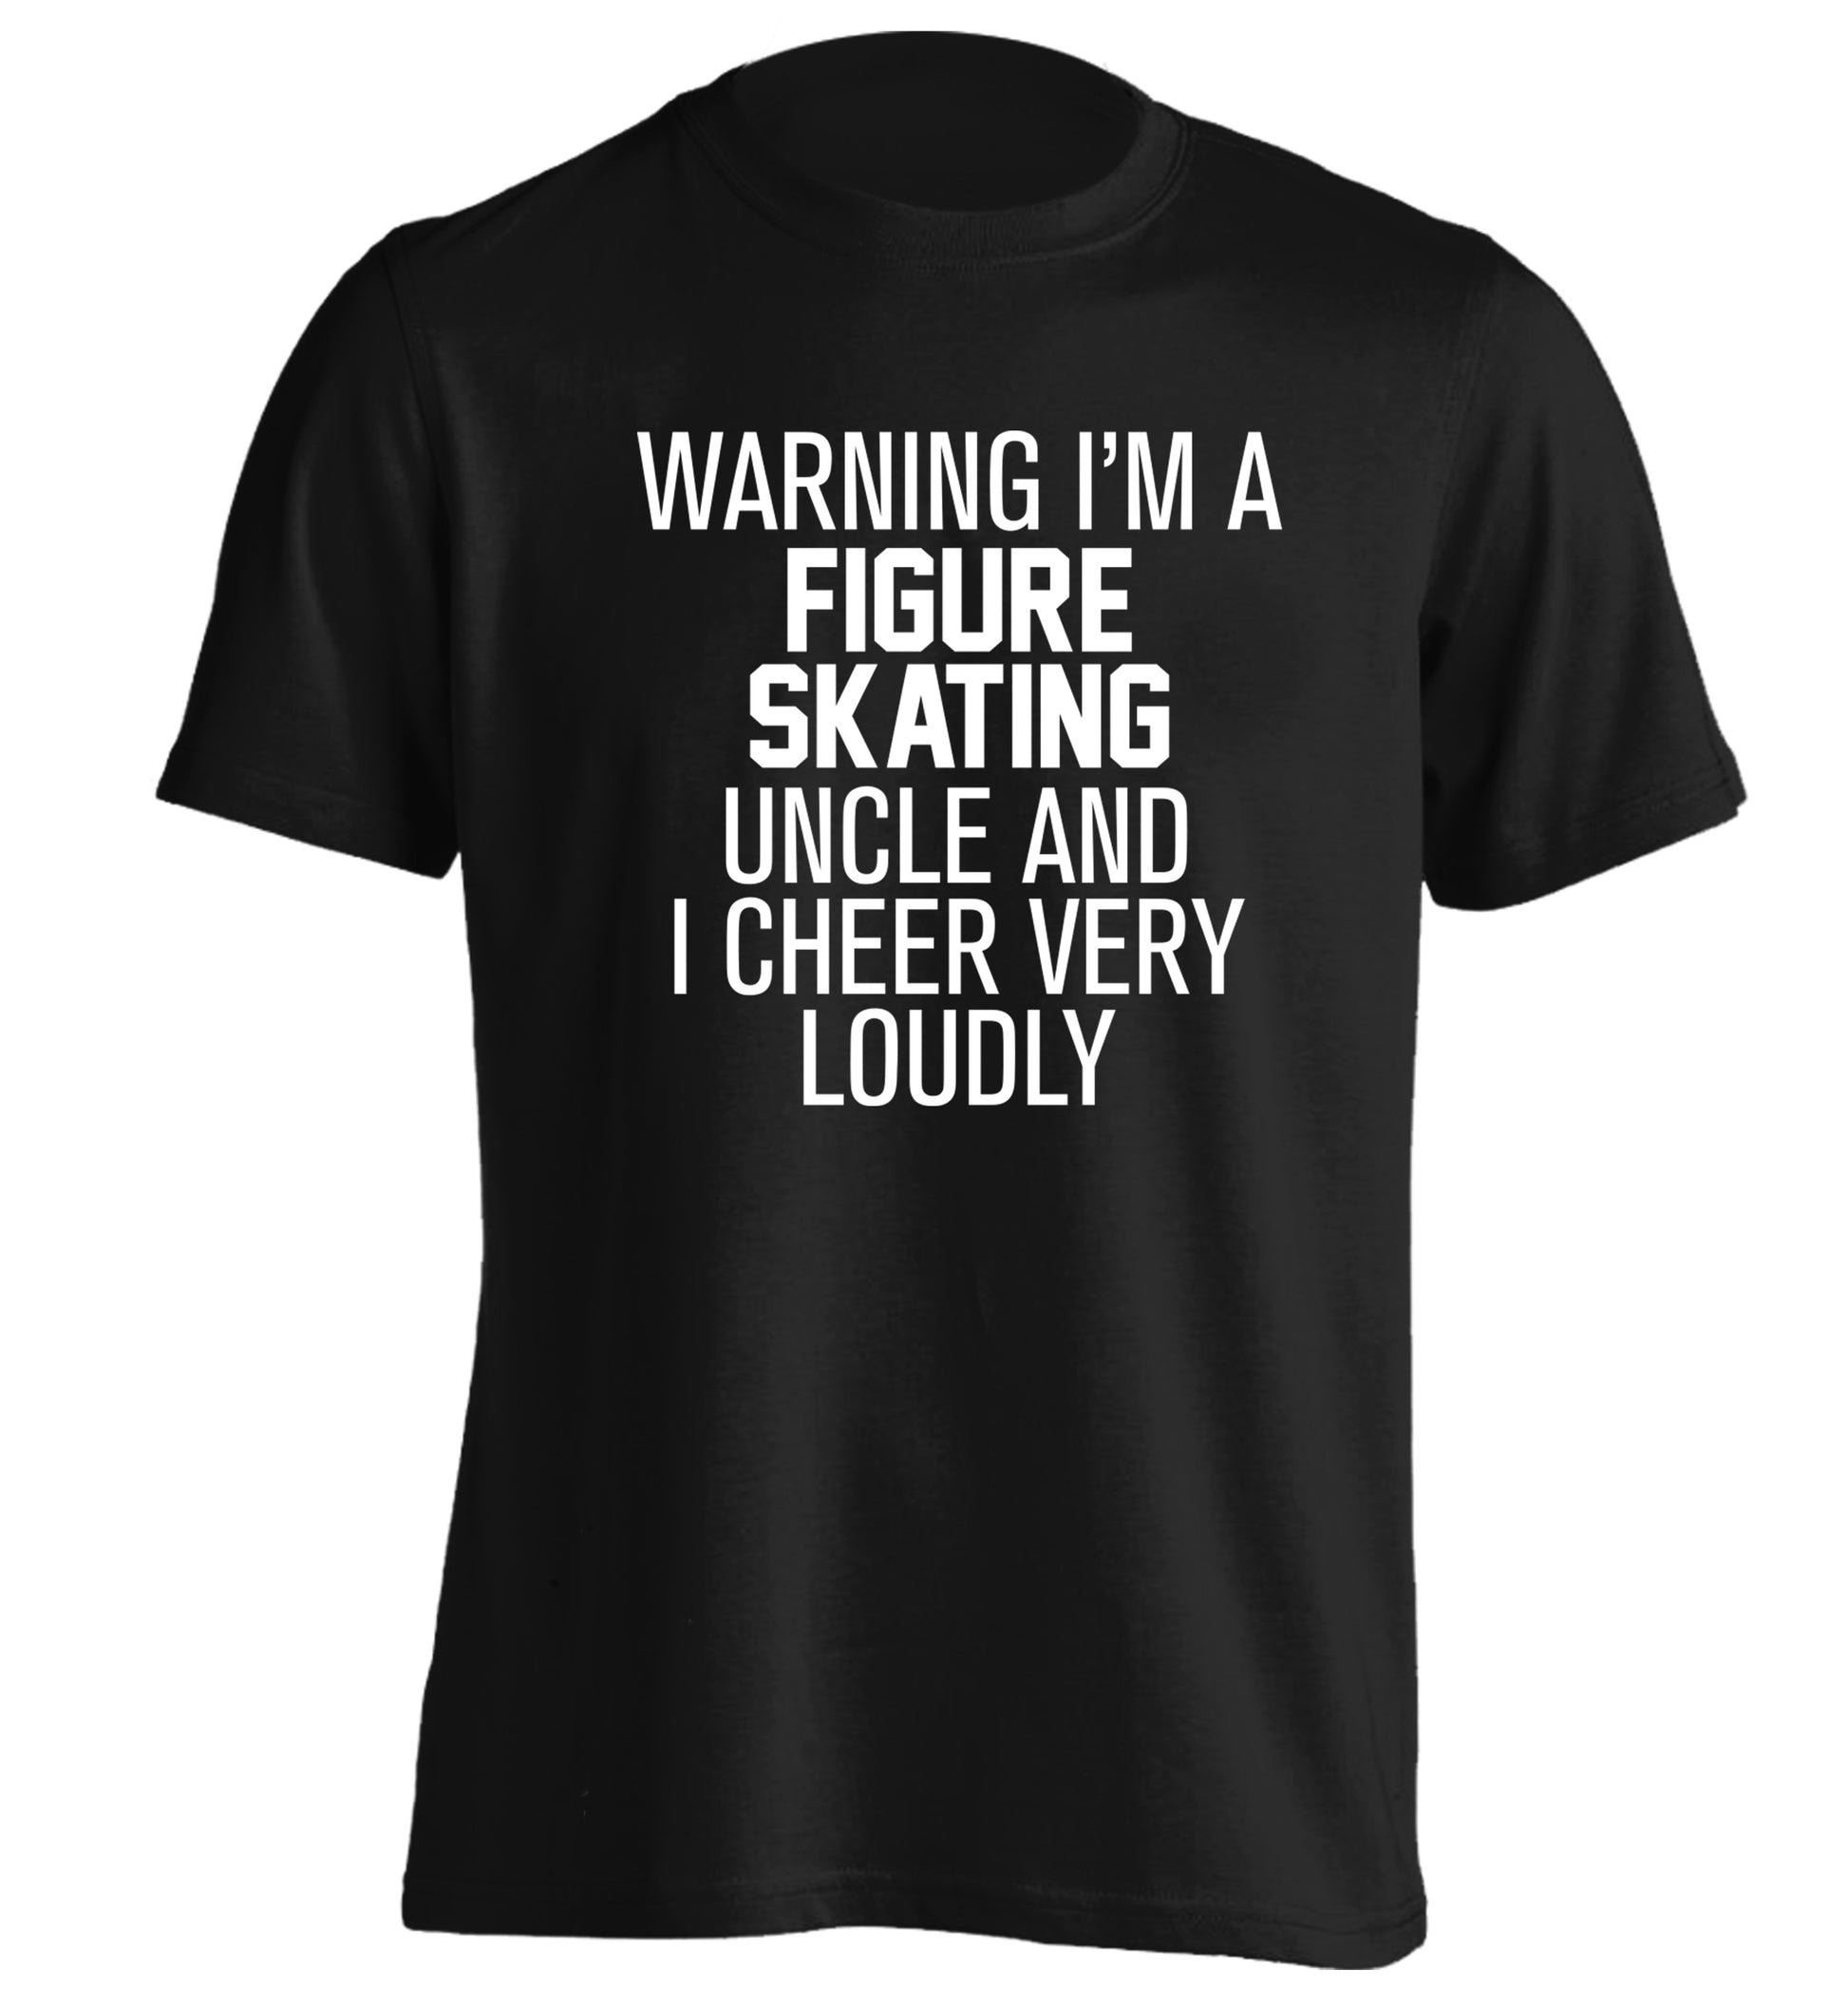 Warning I'm a figure skating uncle and I cheer very loudly adults unisexblack Tshirt 2XL